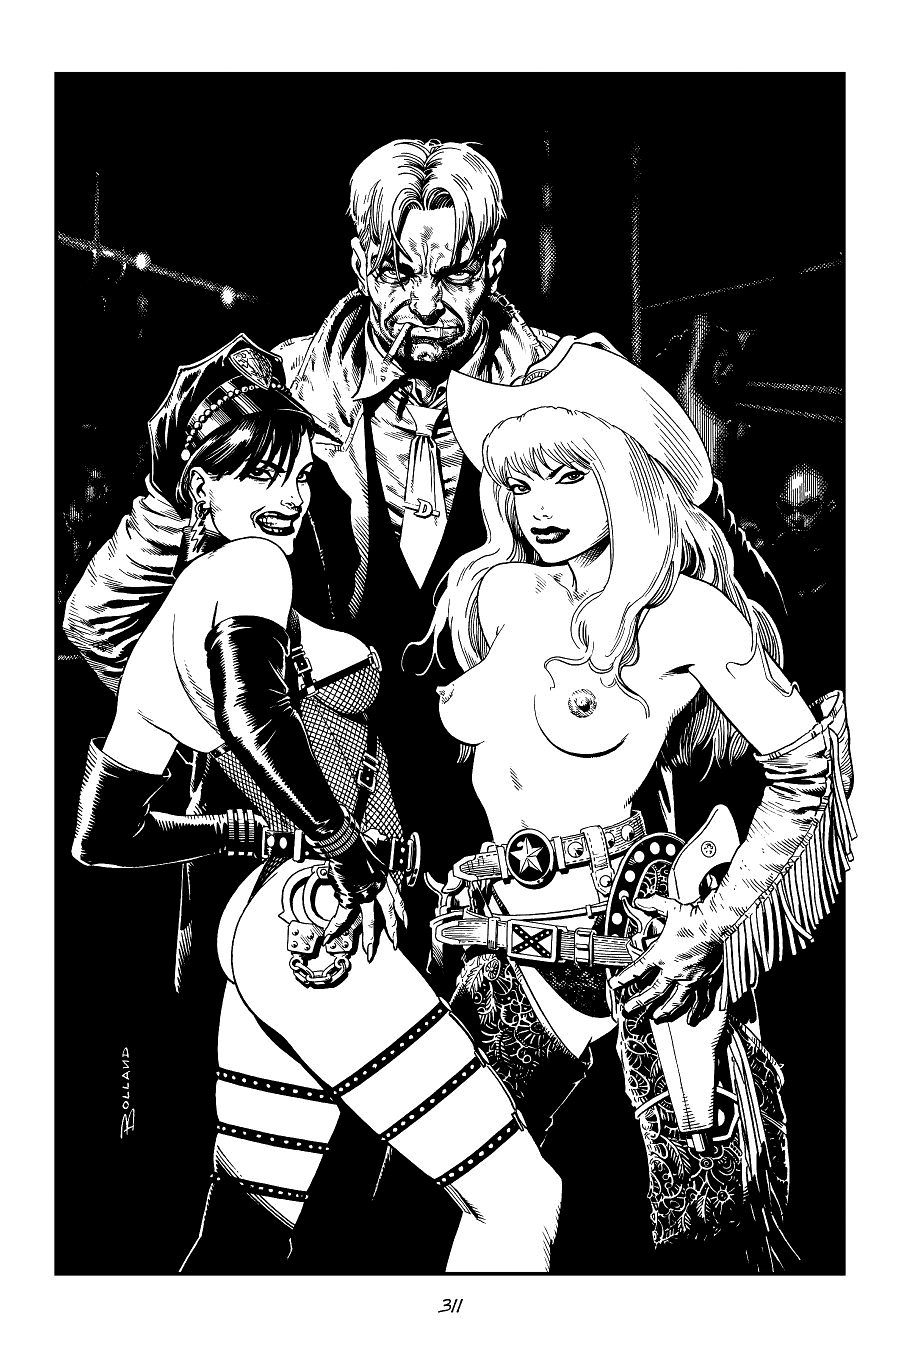 page 311 of sin city 7 hell and back